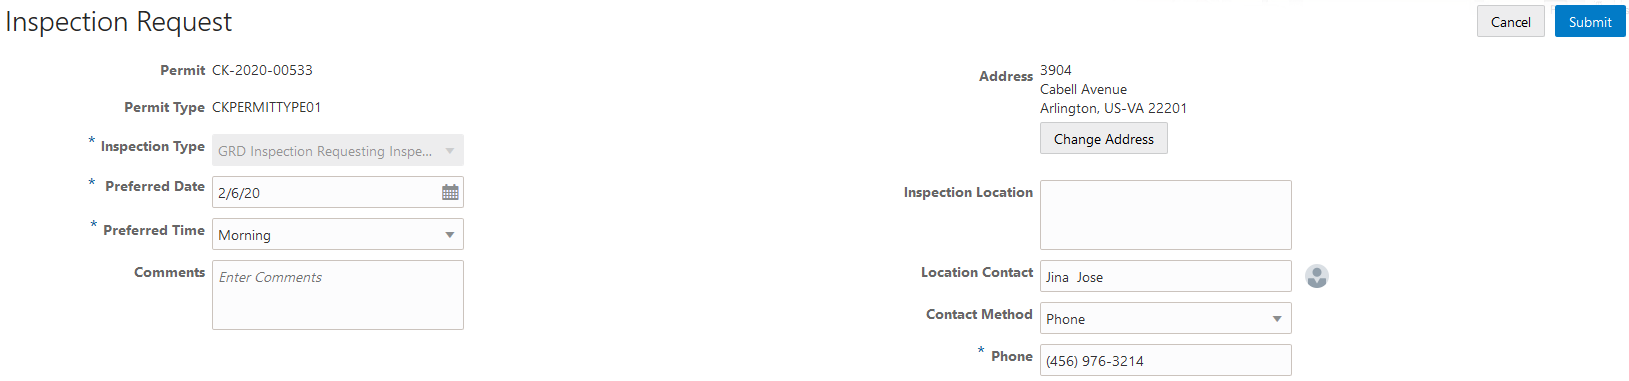 Example of the Inspection Request page